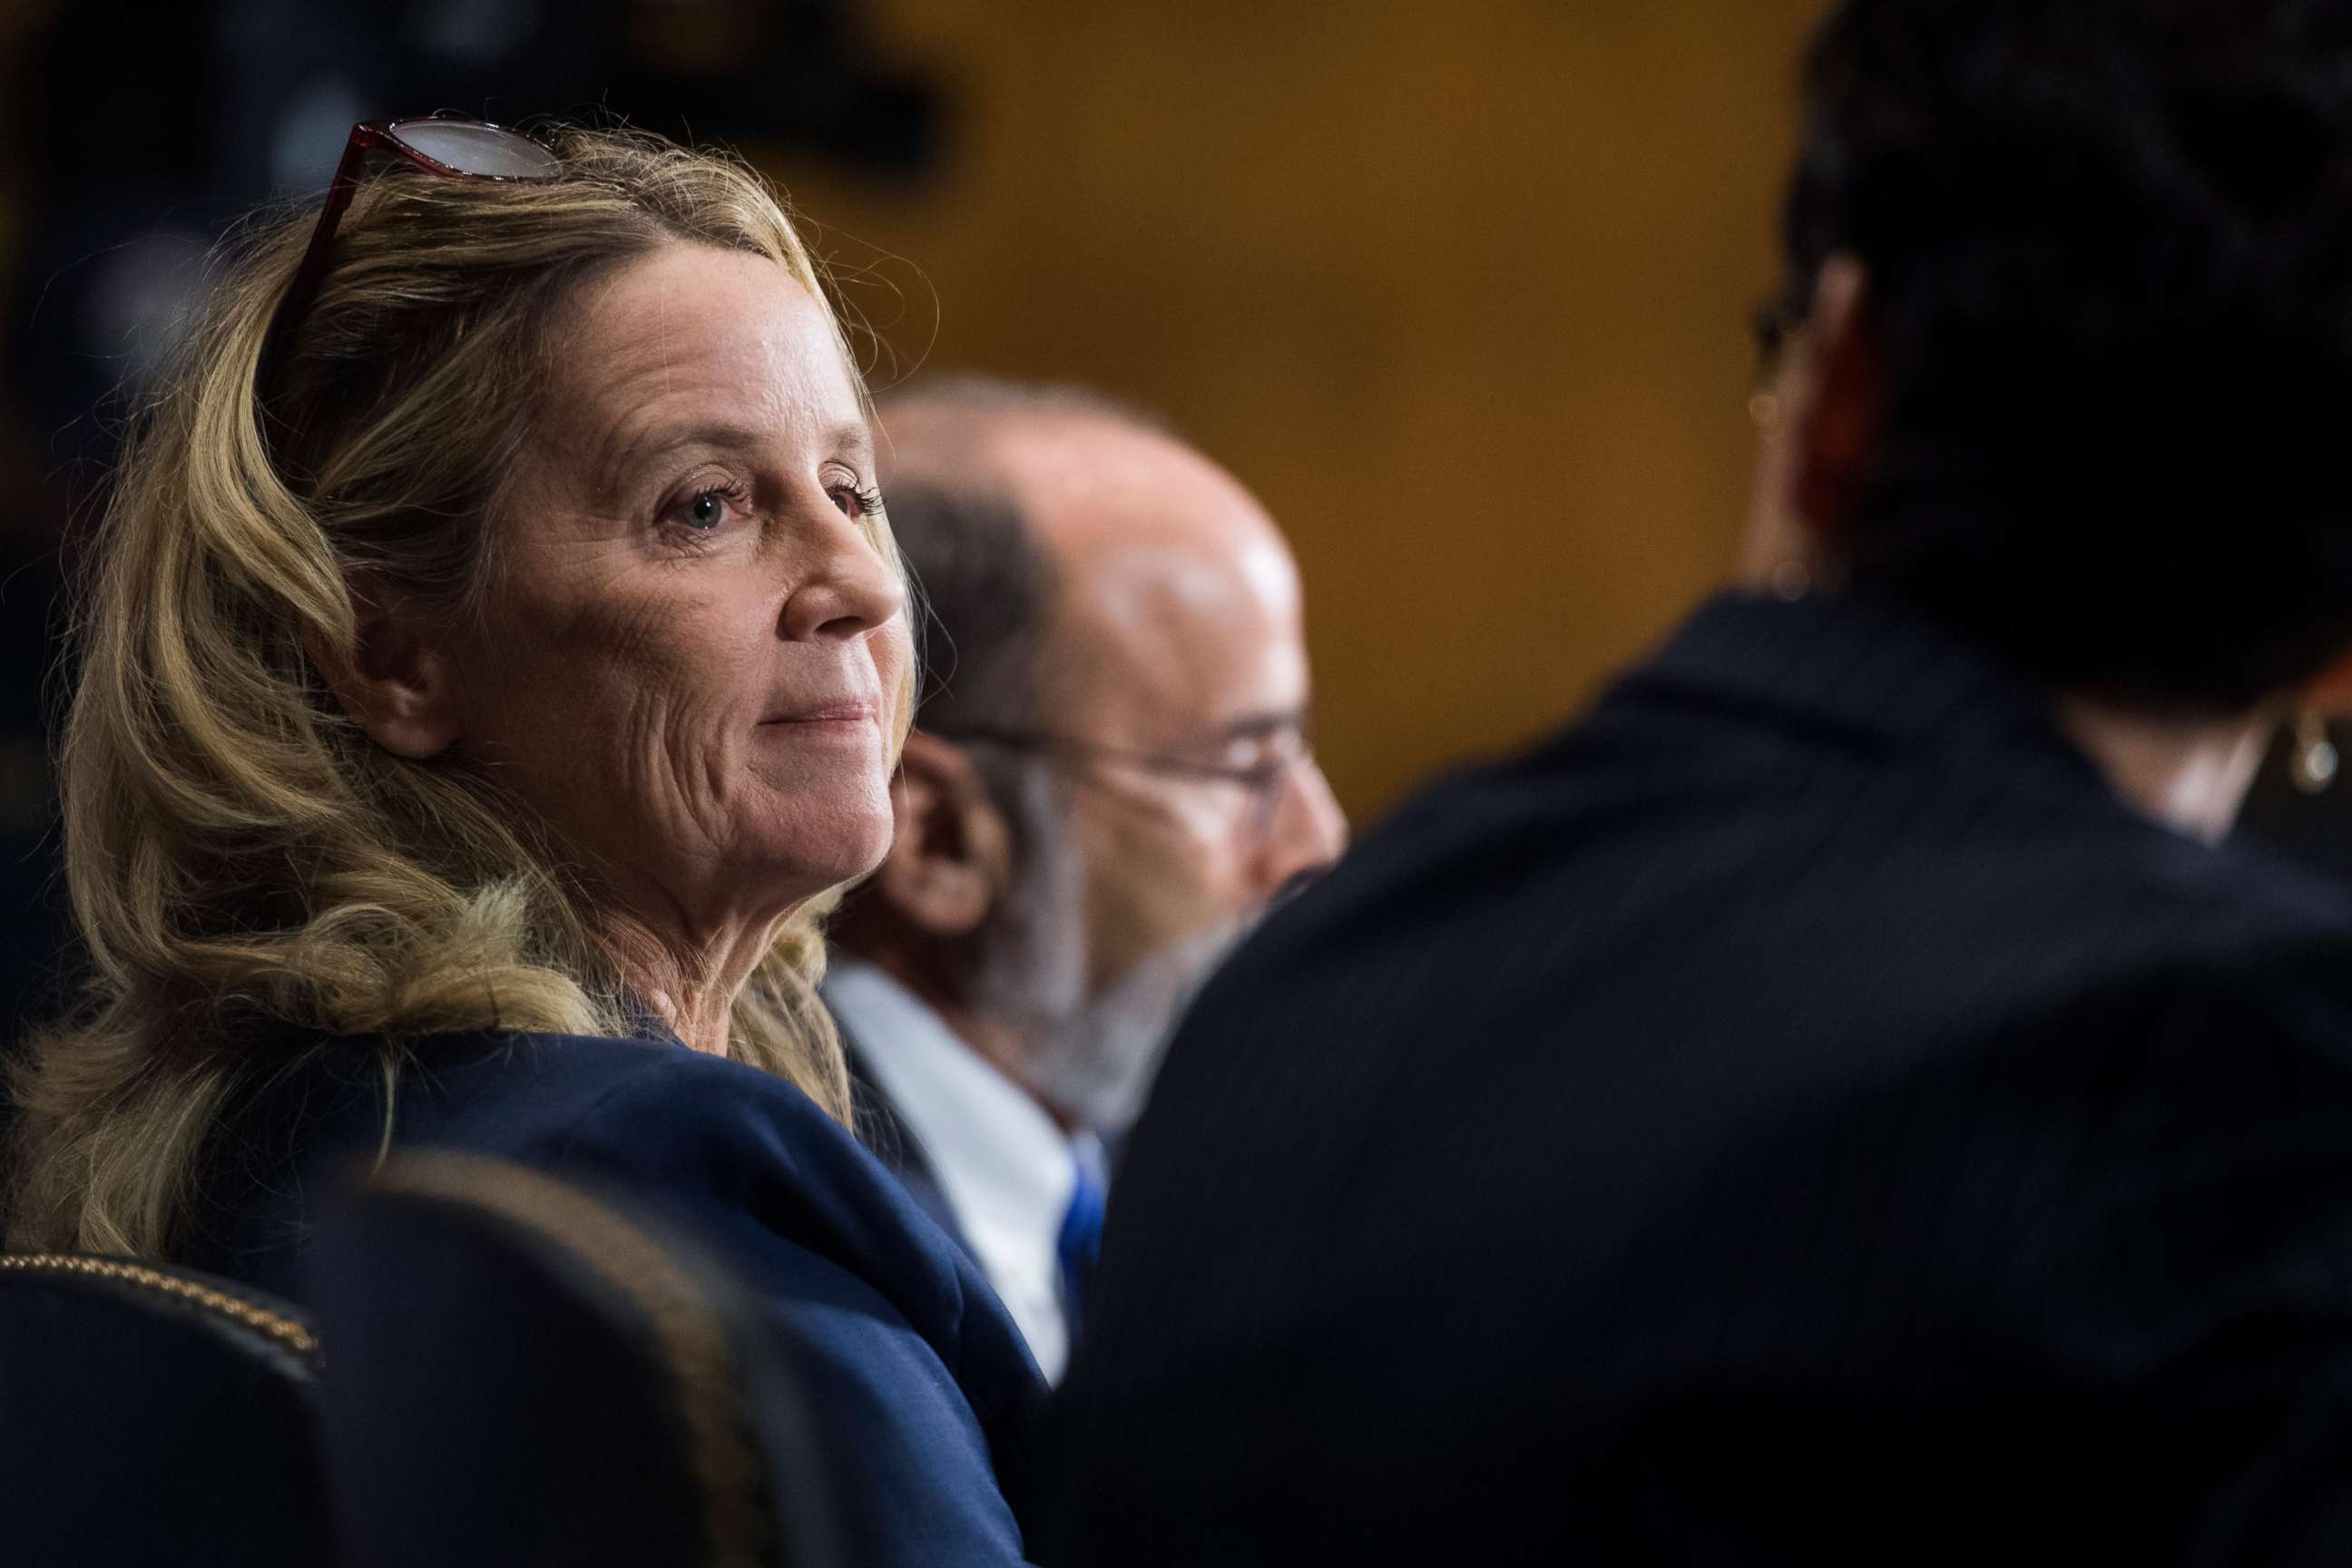 PHOTO: Christine Blasey Ford, center, flanked by her attorneys, testifies during the Senate Judiciary Committee hearing on the nomination of Brett M. Kavanaugh to be an associate justice of the Supreme Court of the United States,Sept. 27, 2018.